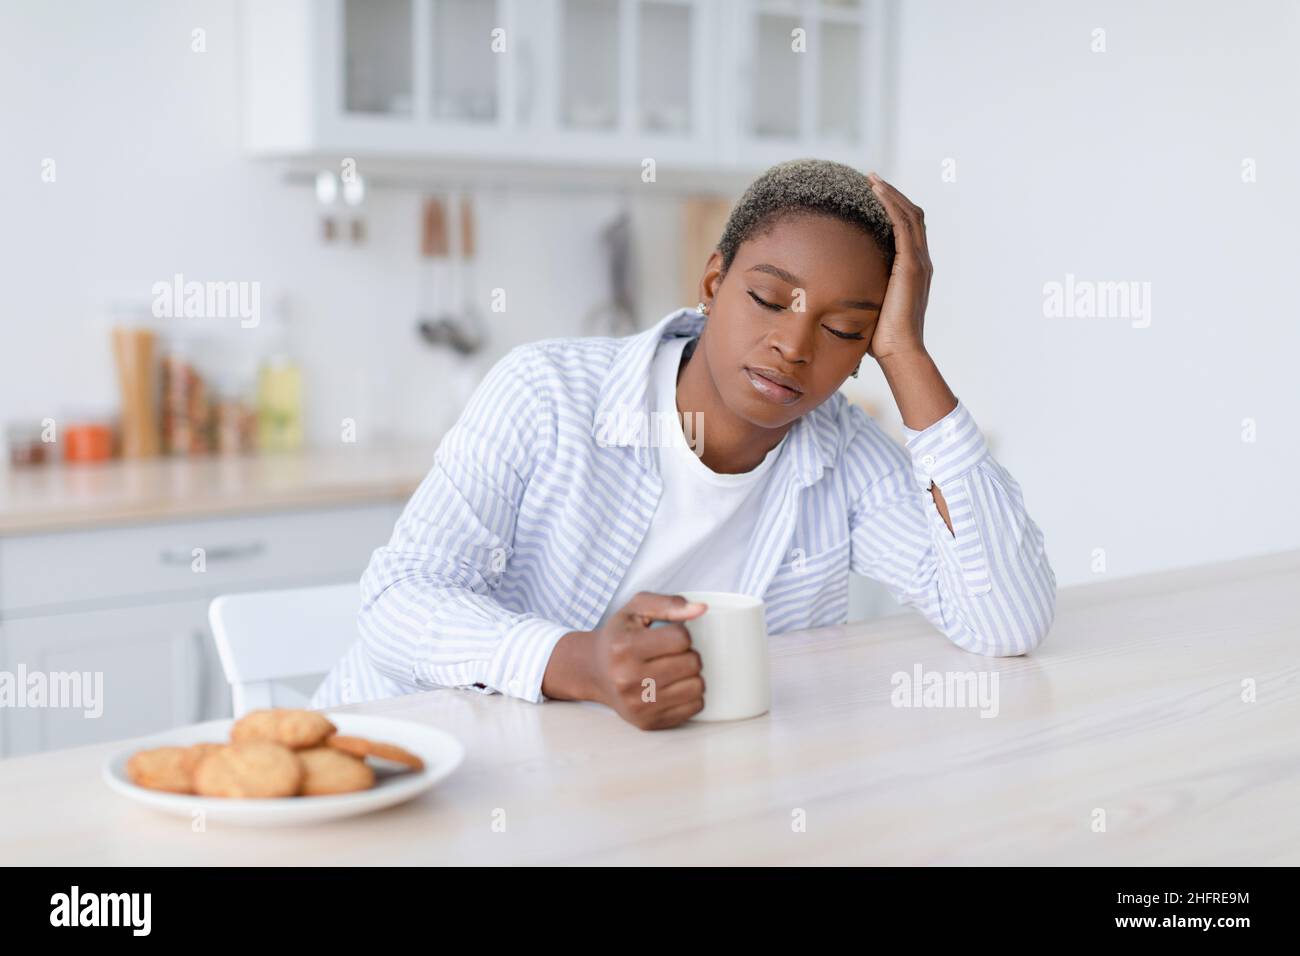 Tired sleepy young attractive black woman with cup of drink sits at table with cookies in scandinavian kitchen interior Stock Photo